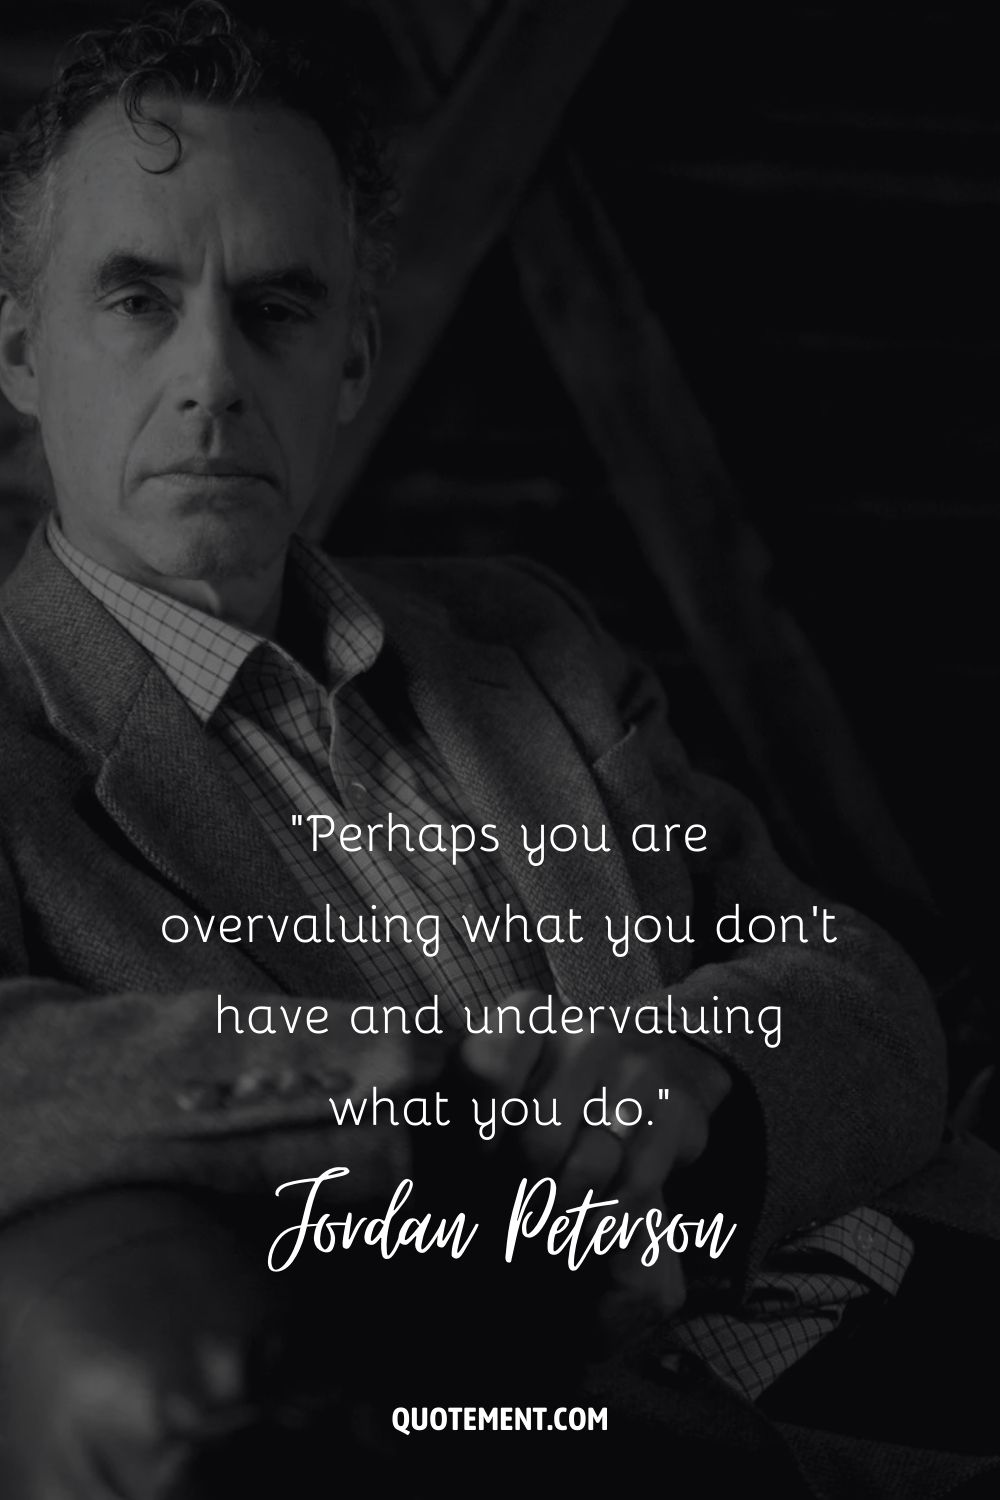 Perhaps you are overvaluing what you don’t have and undervaluing what you do